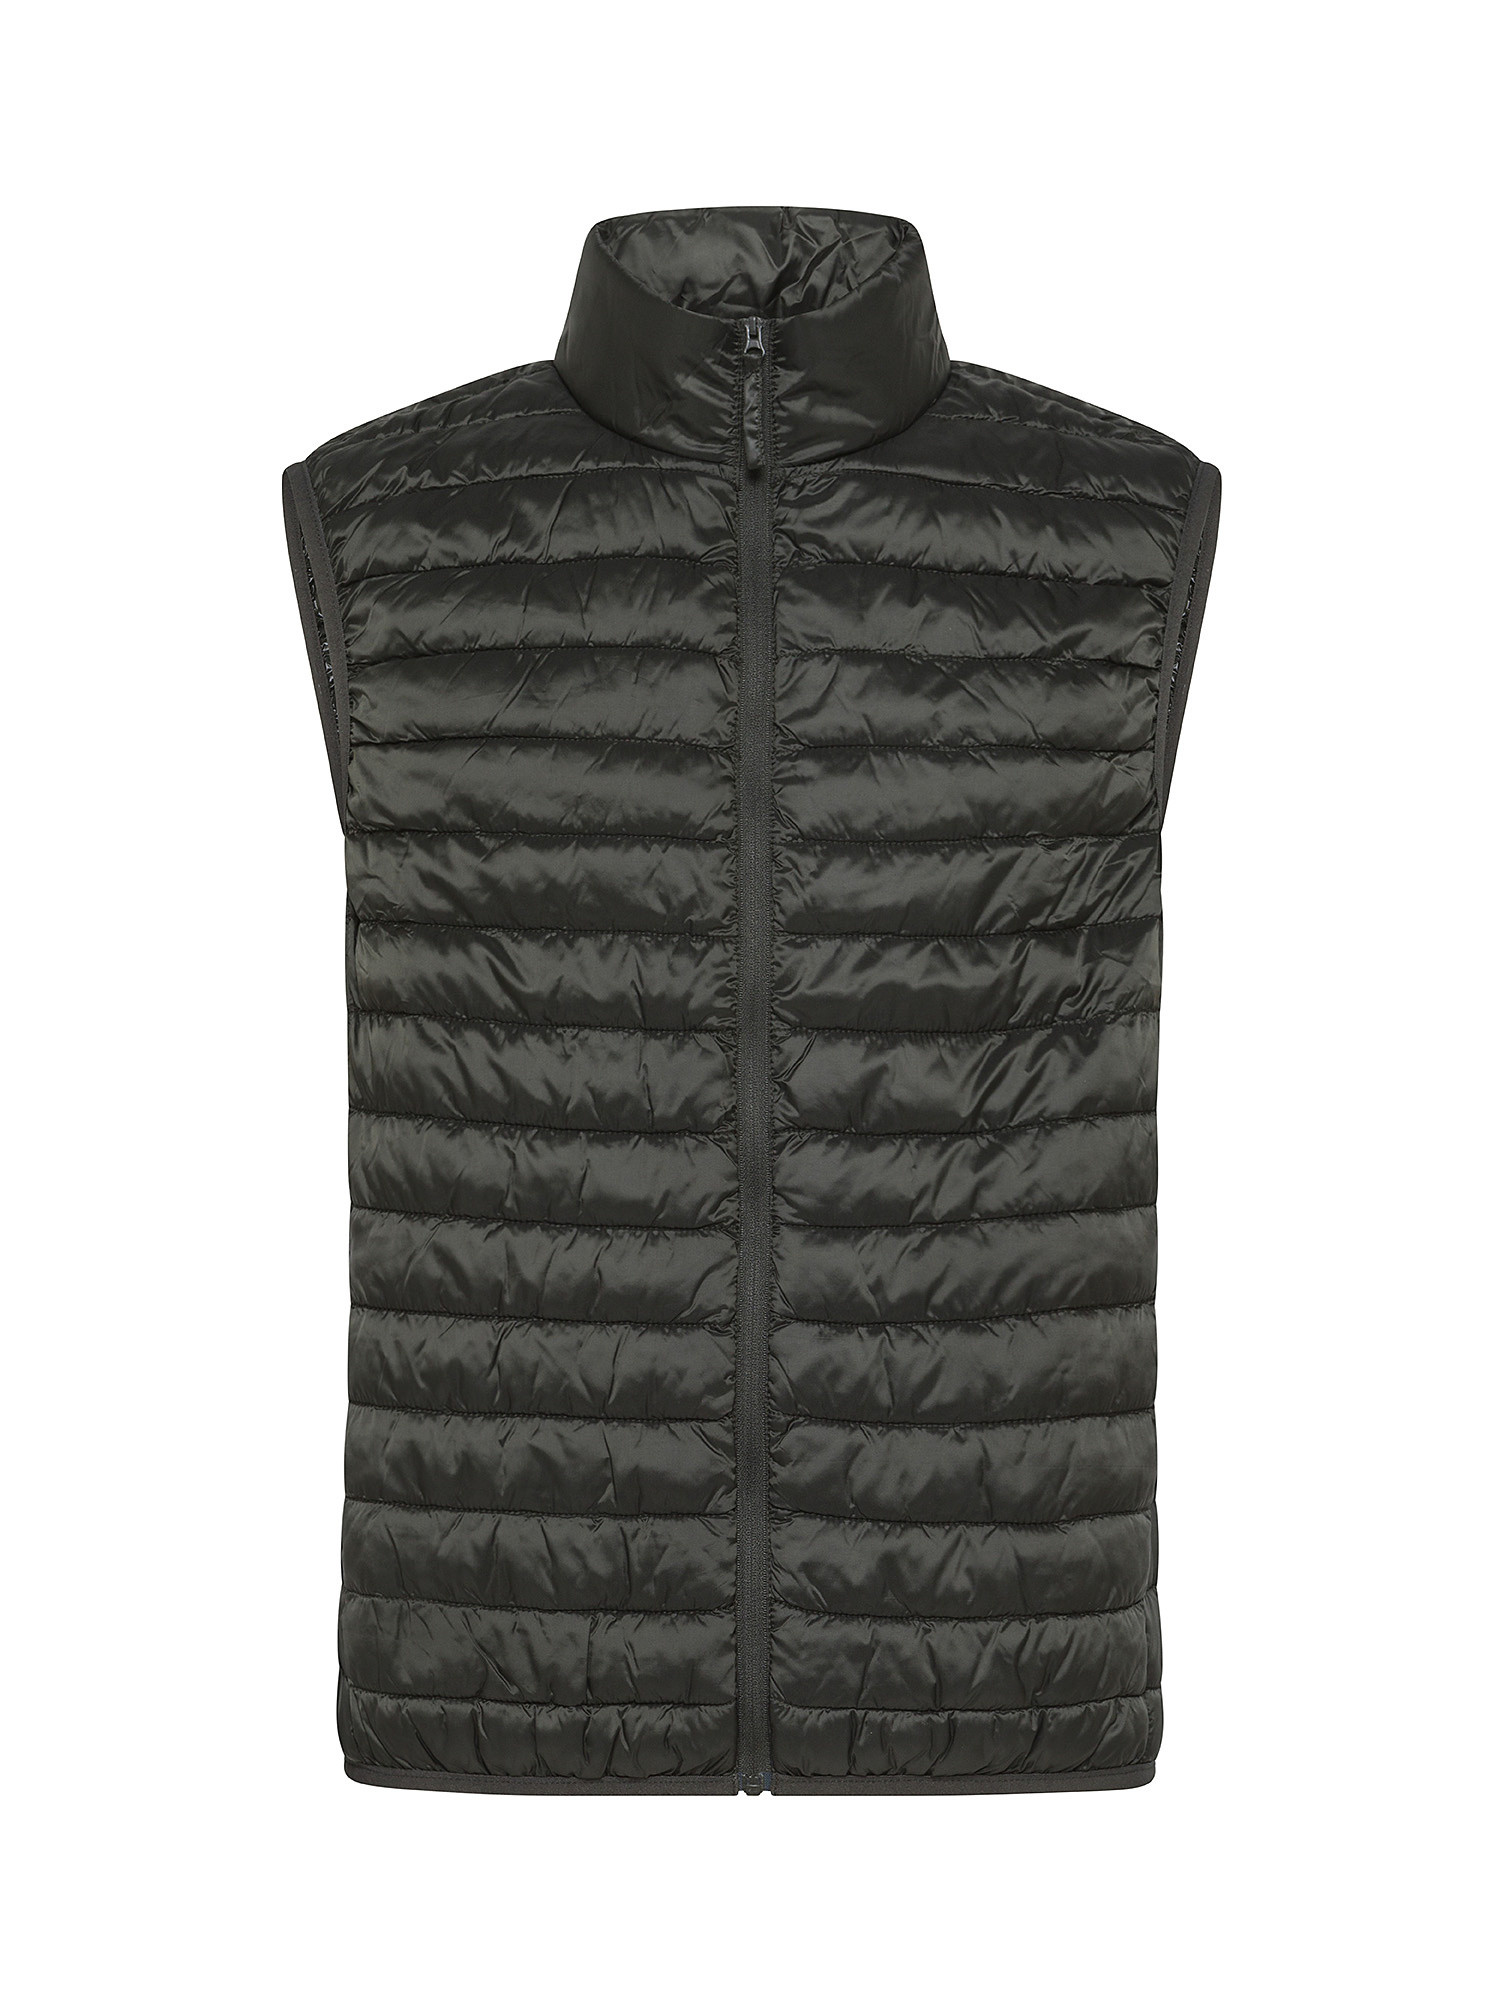 JCT - Quilted sleeveless down jacket, Dark Green, large image number 0